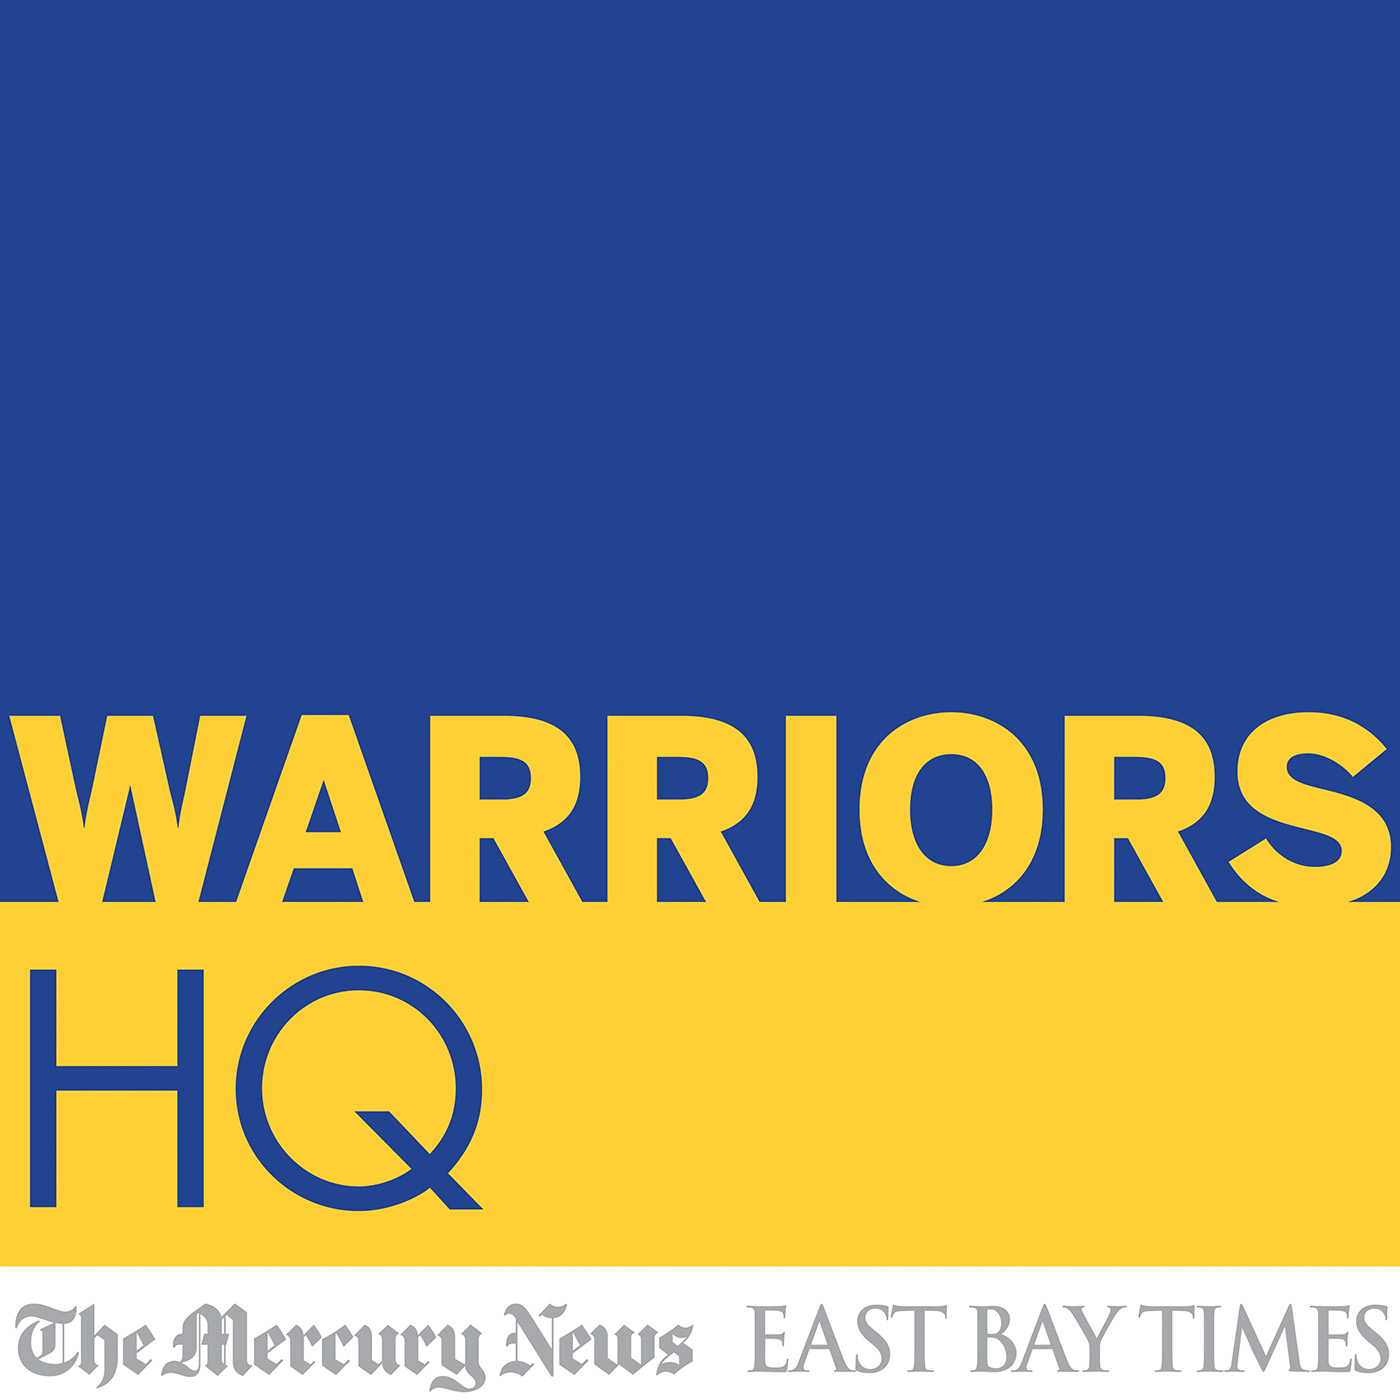 Warriors will face the Rockets after win over Clippers